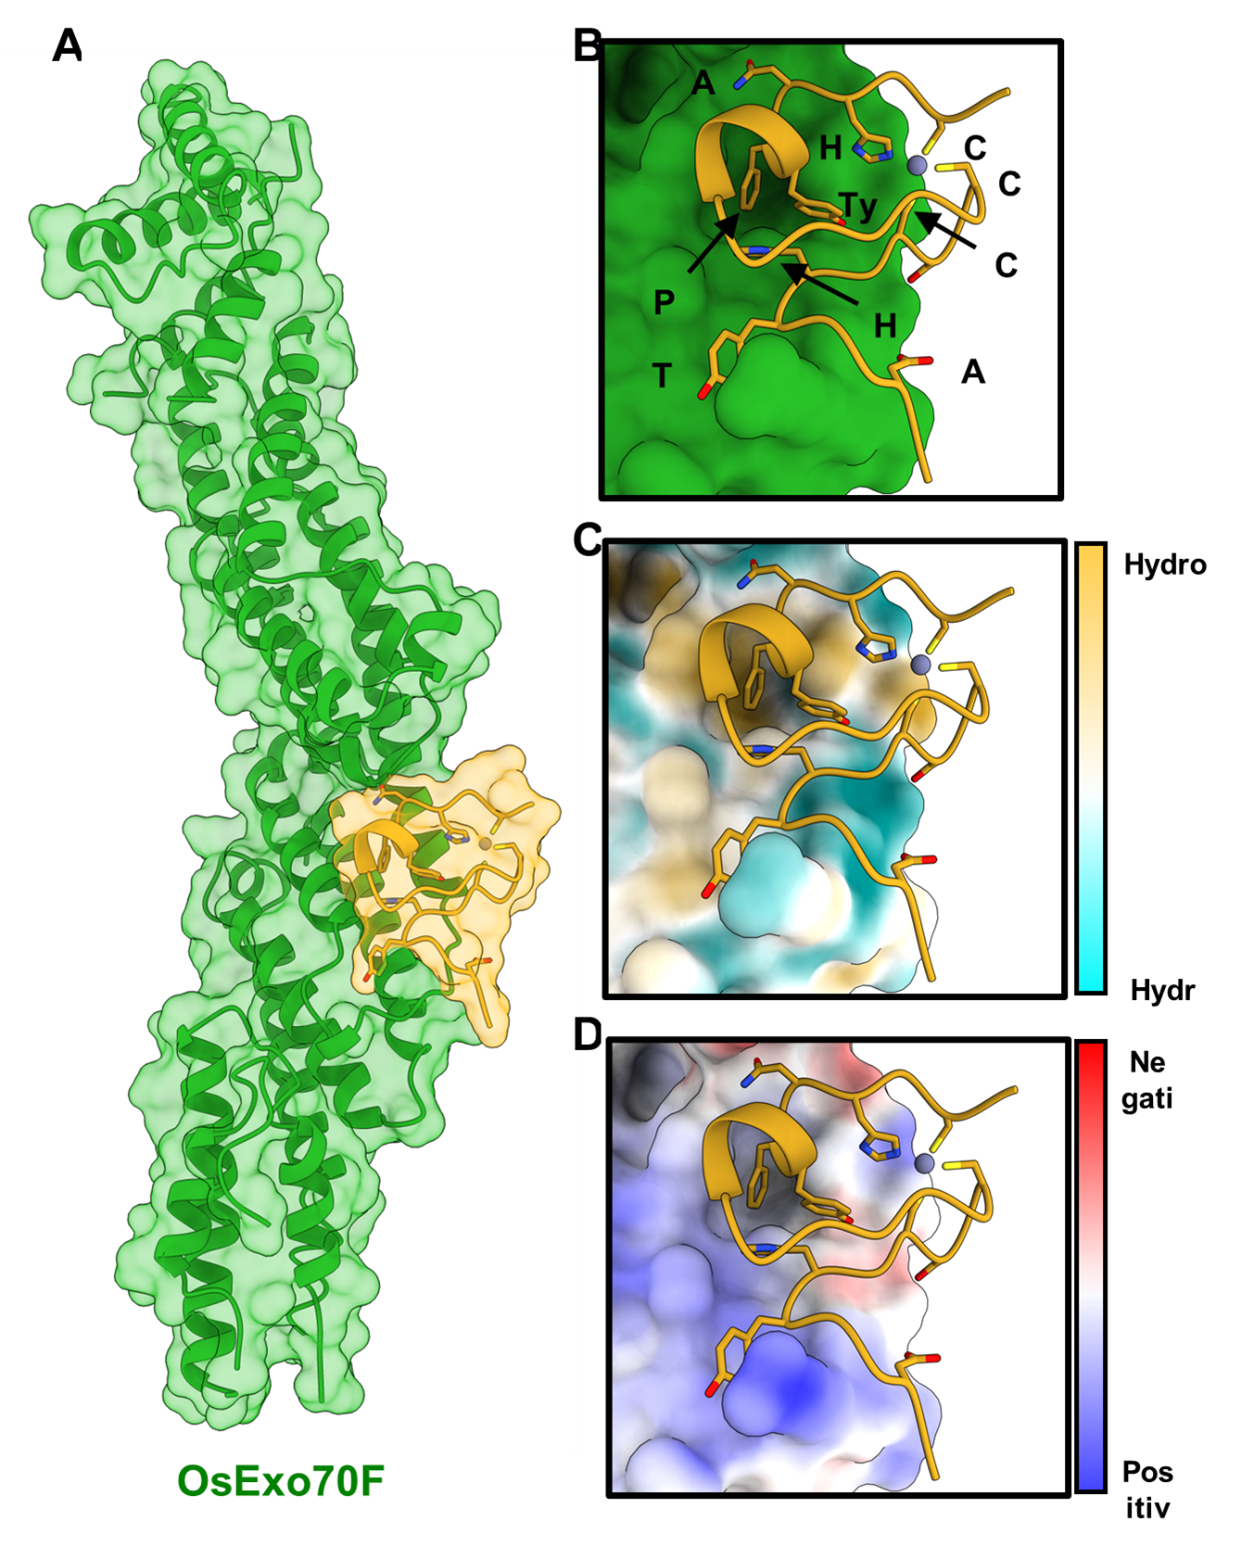 Figure caption: The crystal structure of rice OsExo70F2 in complex with M. oryzae AVR-Pii reveals the molecular details of the interaction interface. (A) Schematic representation of OsExo70F2 in complex with AVR-Pii. The molecular surface of both molecules are shown in green and yellow for OsExo70F2 and AVR-Pii, respectively. (B) Close-up view of the interaction interface between OsExo70F2 and AVR-Pii reveals AVR-Pii residues involved in the interaction with the target (Asp45, Tyr48, His49, Tyr64, Phe65, and Asn66) in addition to the residues mediating the protein fold by coordinating a Zn2+ atom (Cys51, Cys54, His67, and Cys69). (C) OsExo70F2 surface hydrophobicity representation at the interaction interface shows that AVR-Pii binds OsExo70F2 by docking a residue in a hydrophobic pocket. (D) Representation of OsExo70F2 surface electrostatic potential at the AVR-Pii interaction interface.